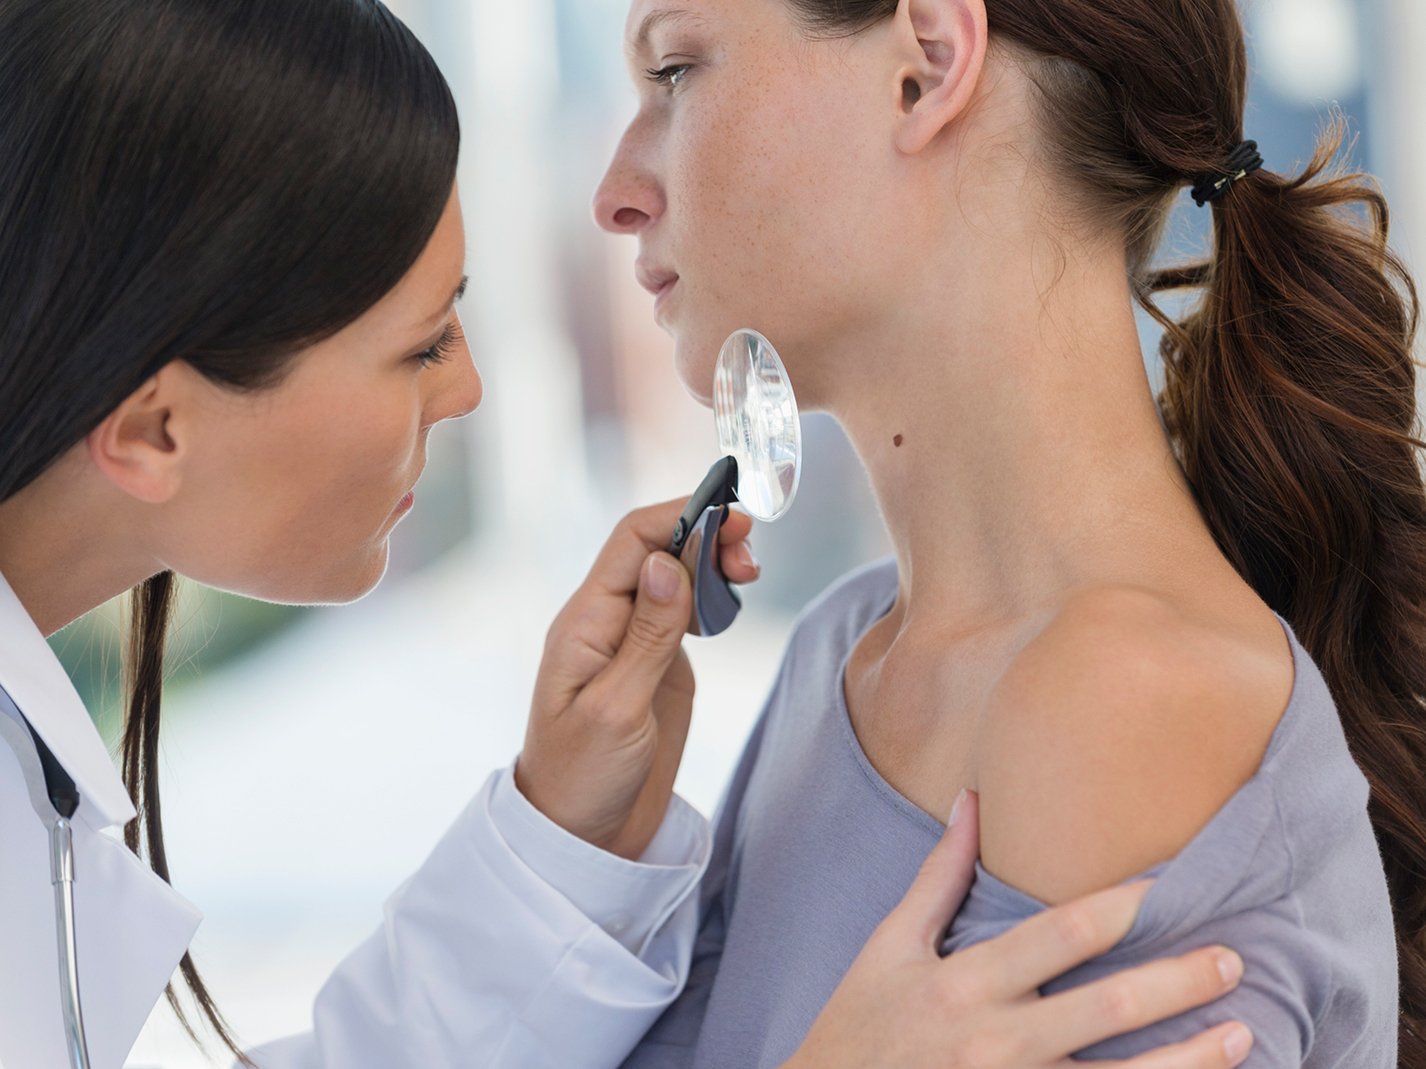 What Doctors and Specialists Treat Skin Cancer?